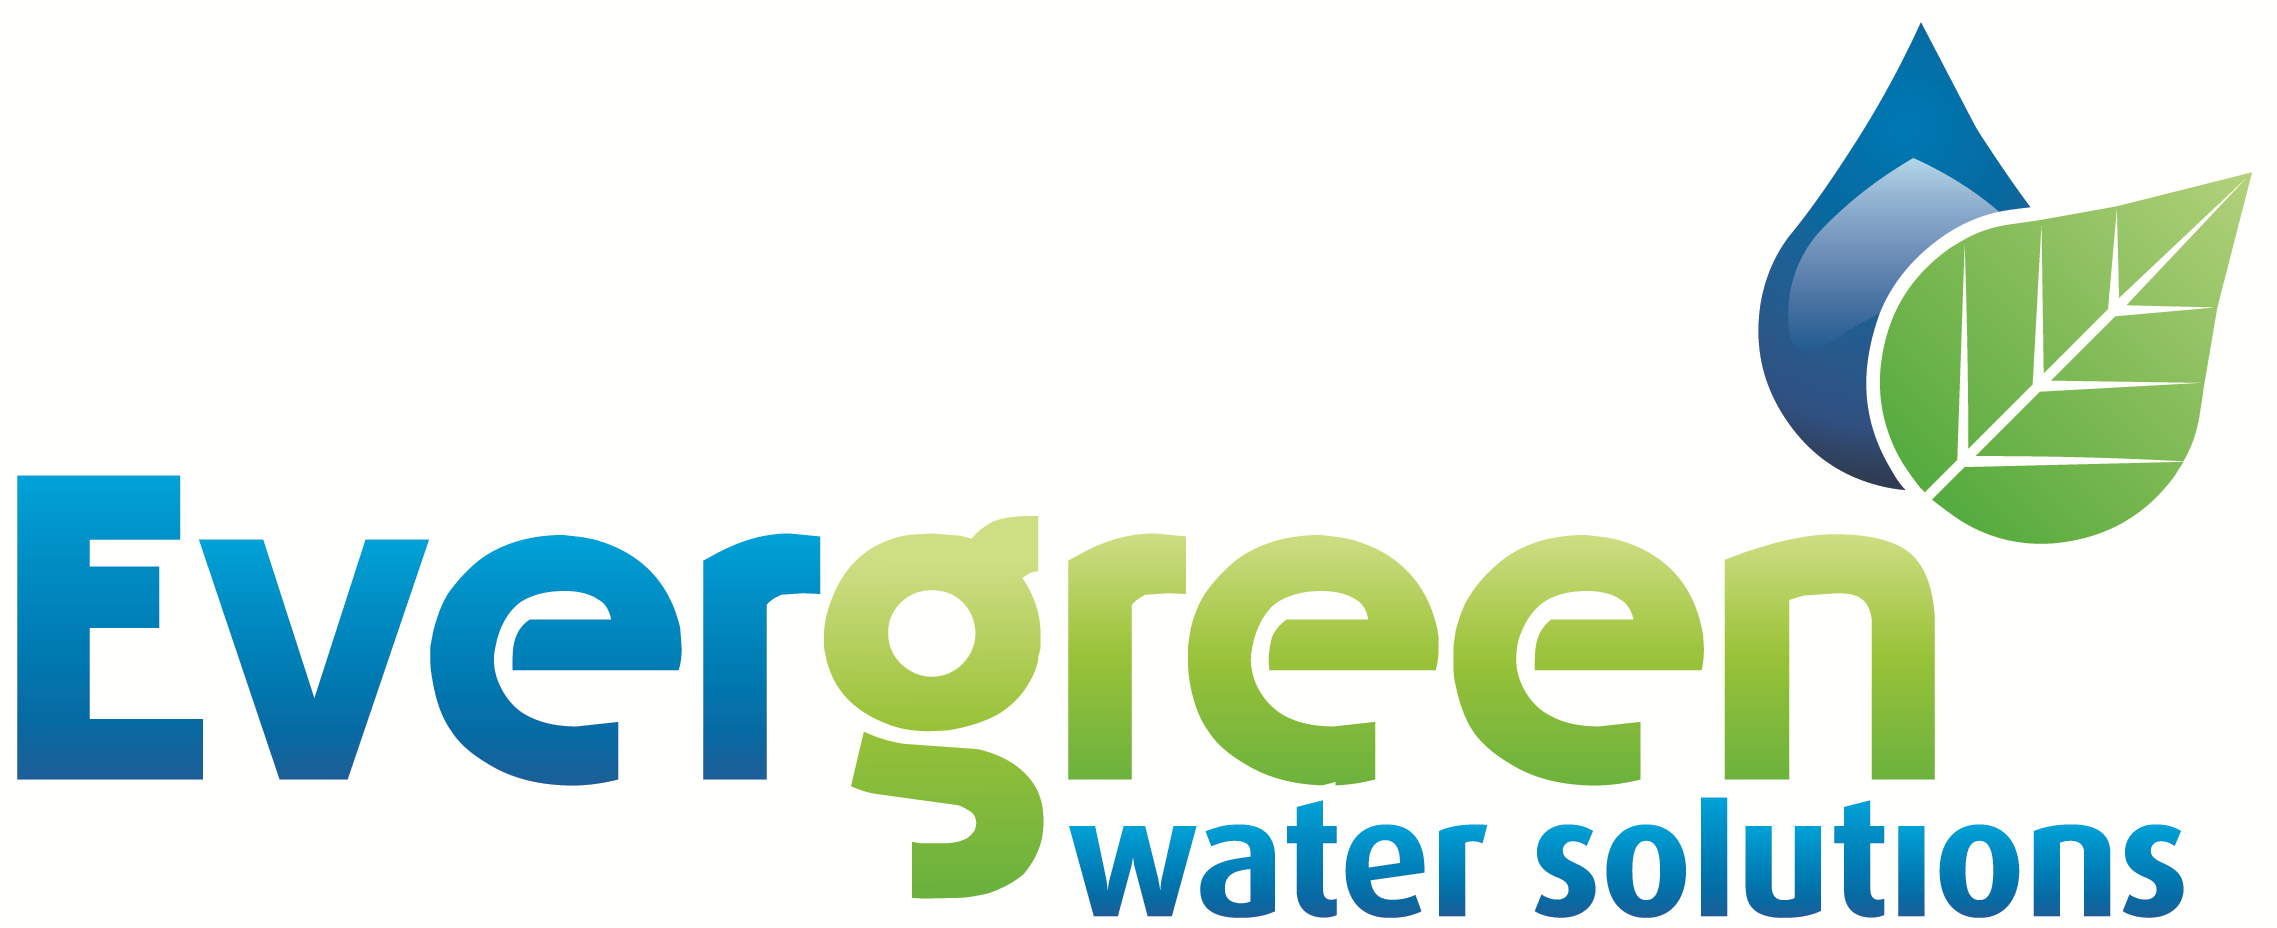 evergreen_water_solutions-1